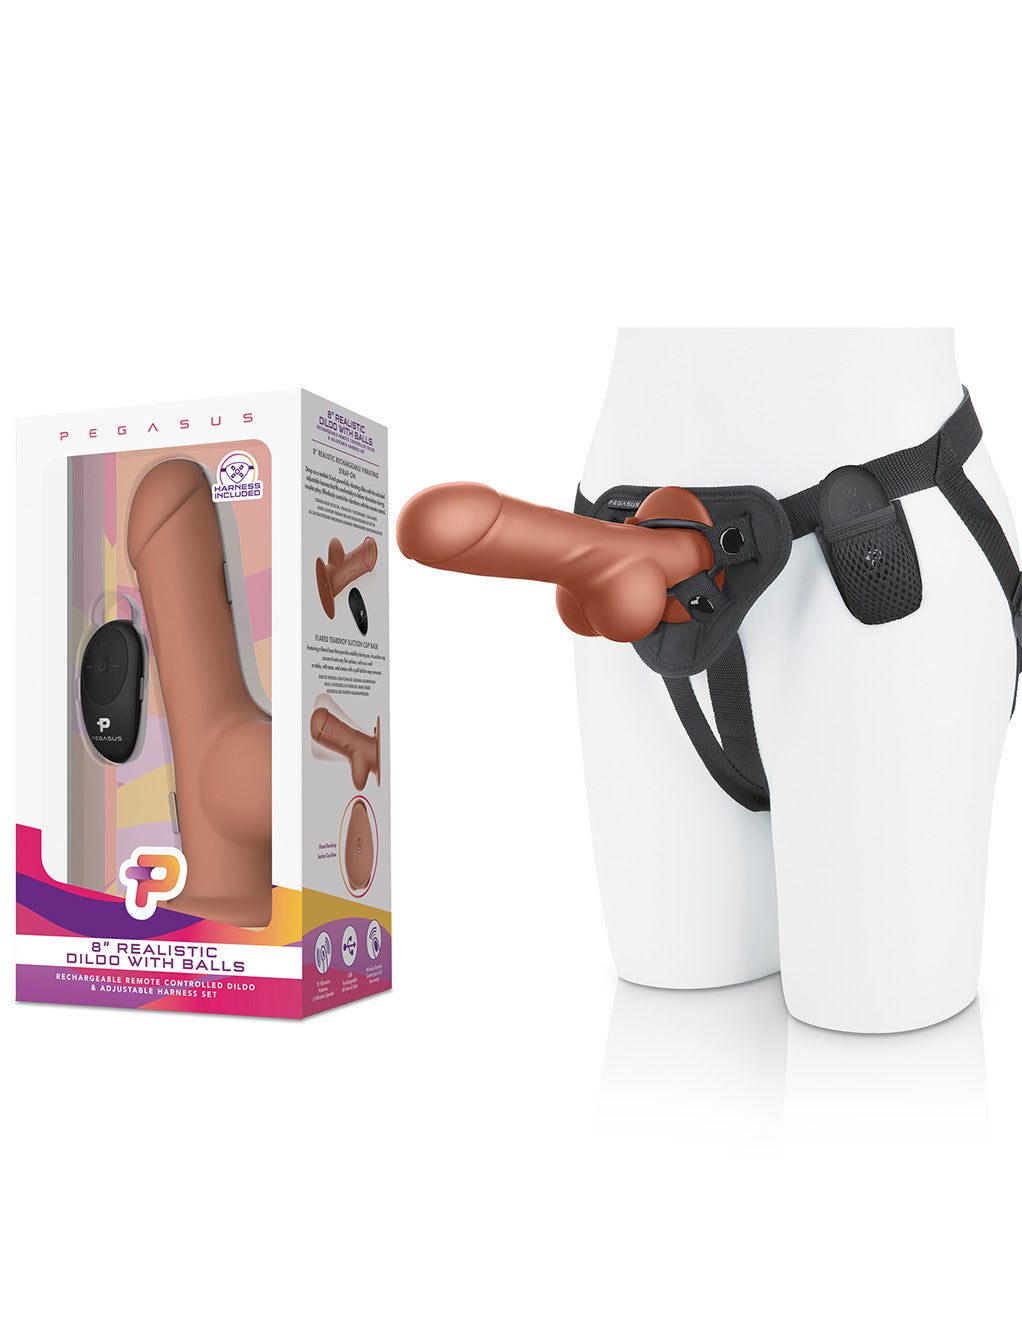 Pegasus 8" Realistic Dildo with Balls Strap-On Set- Package